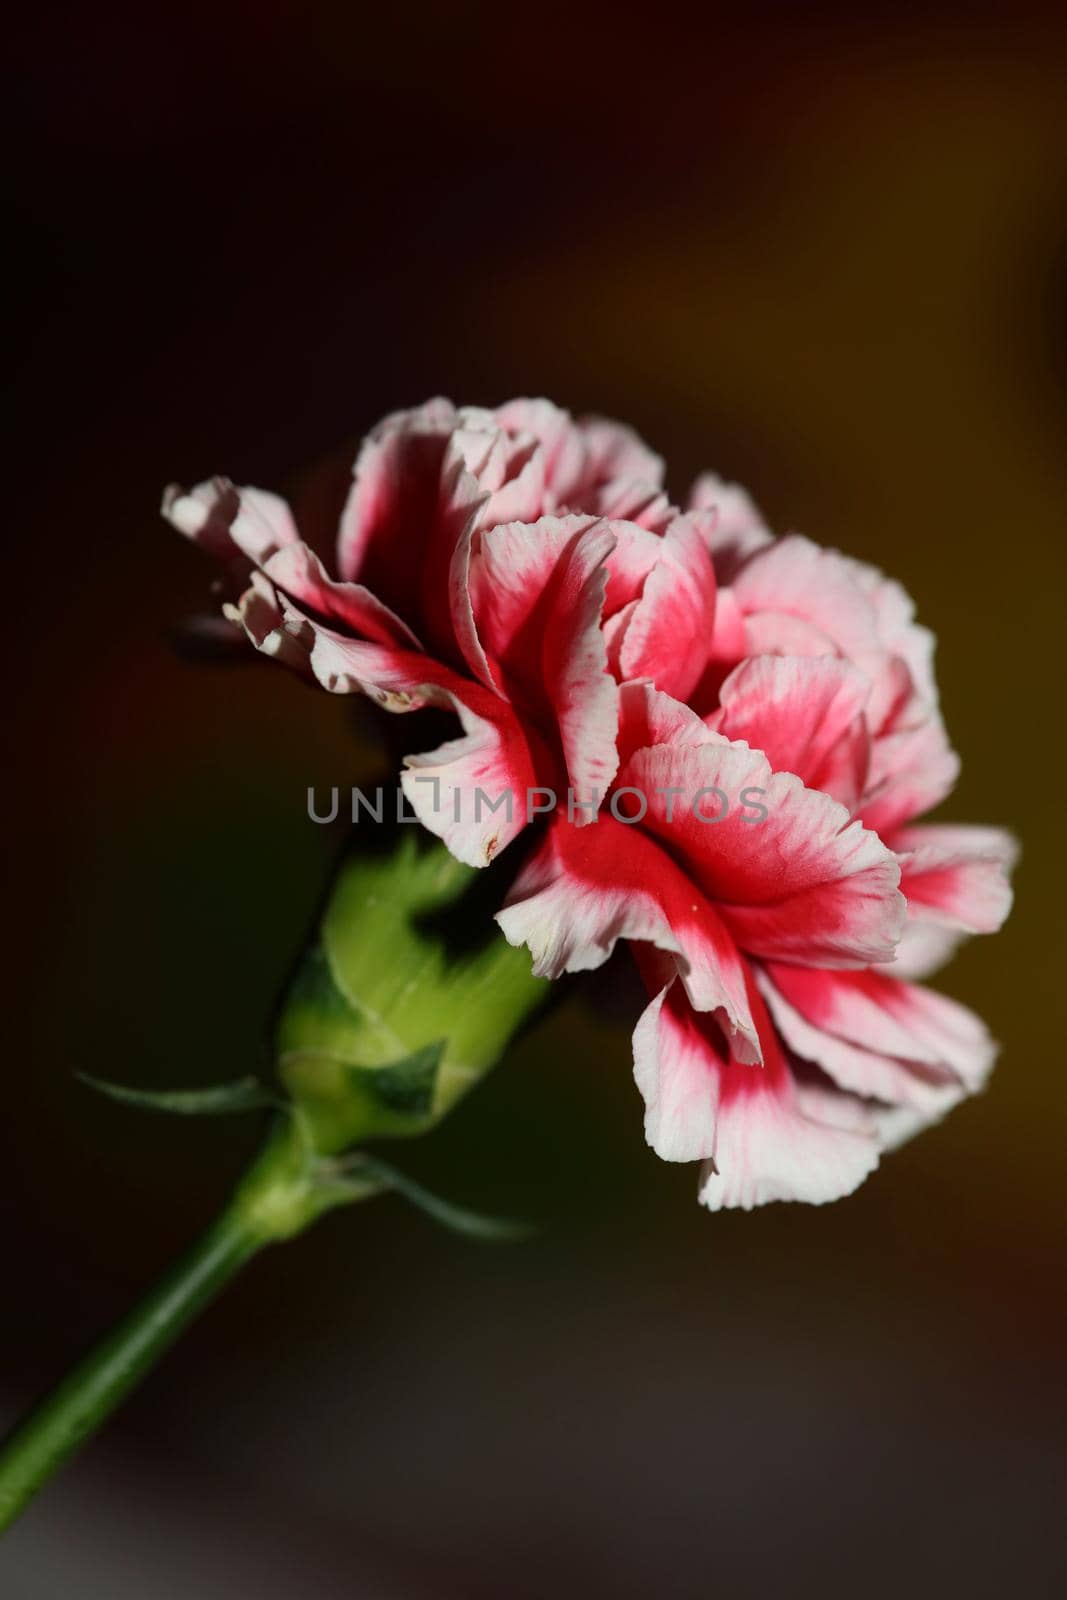 Red flower blossoms close up dianthus caryophyllus family caryophyllaceae botanical background modern high quality big size print by BakalaeroZz